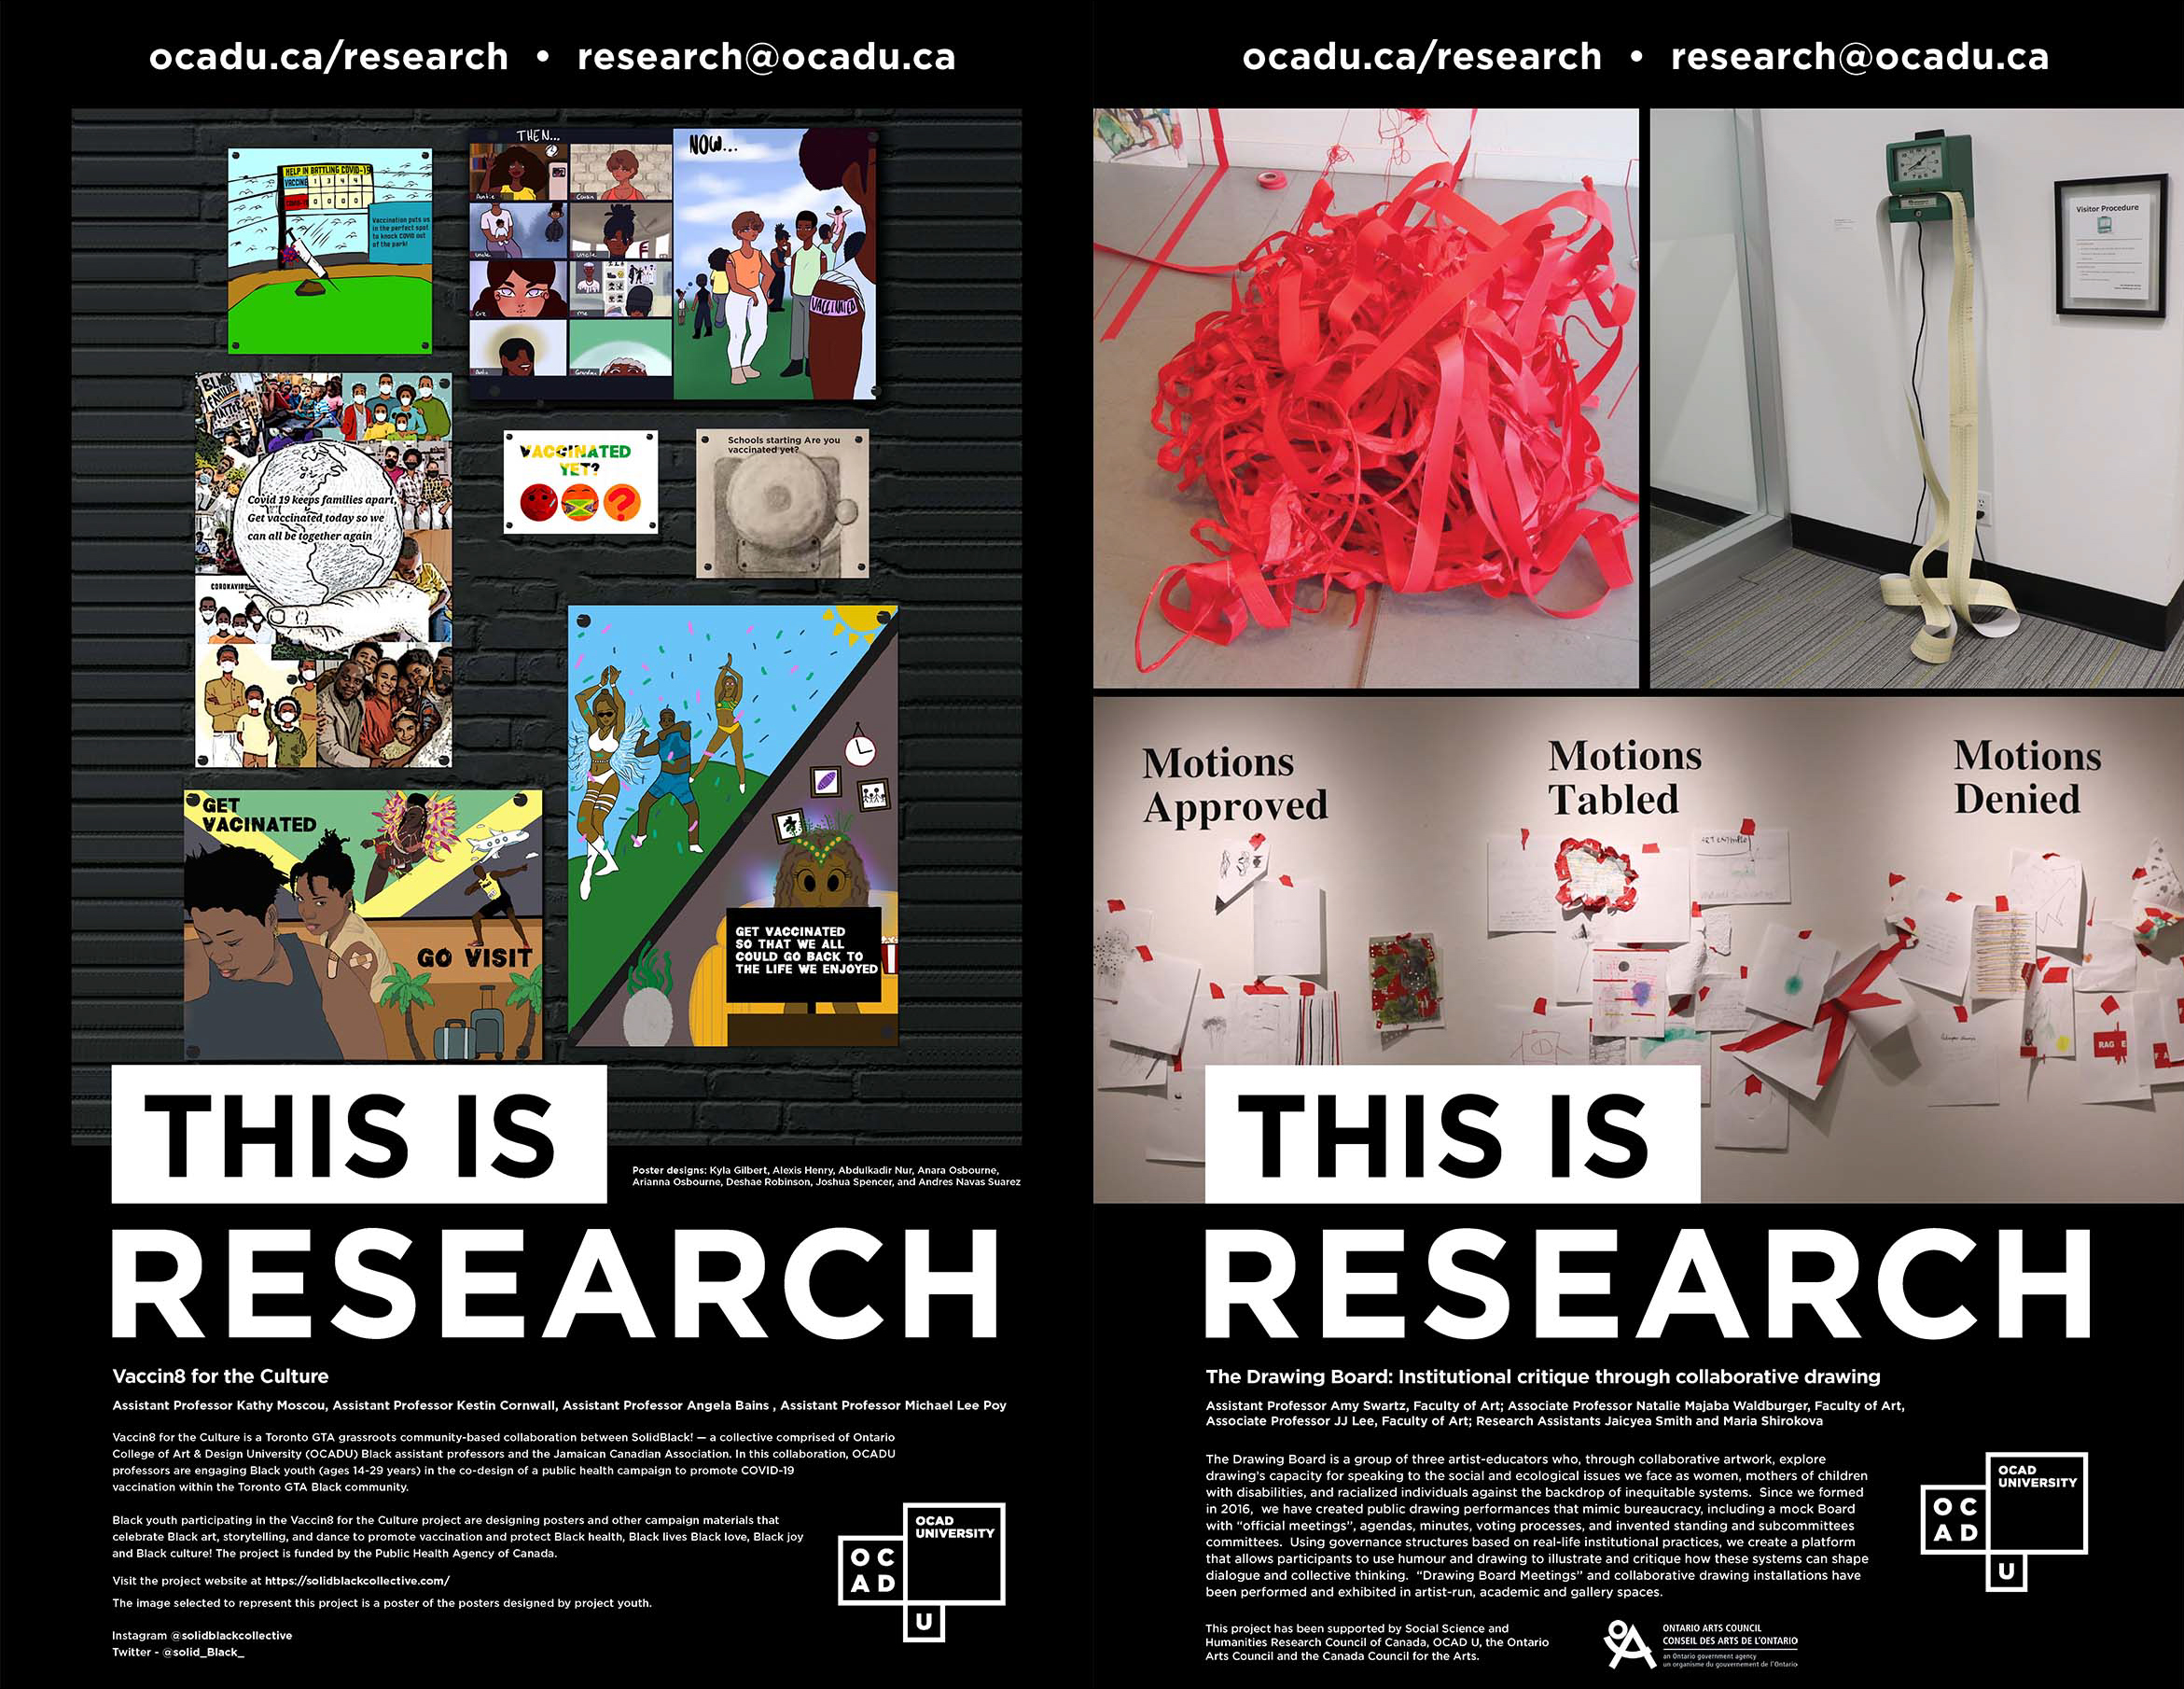 An image of two research posters side by side